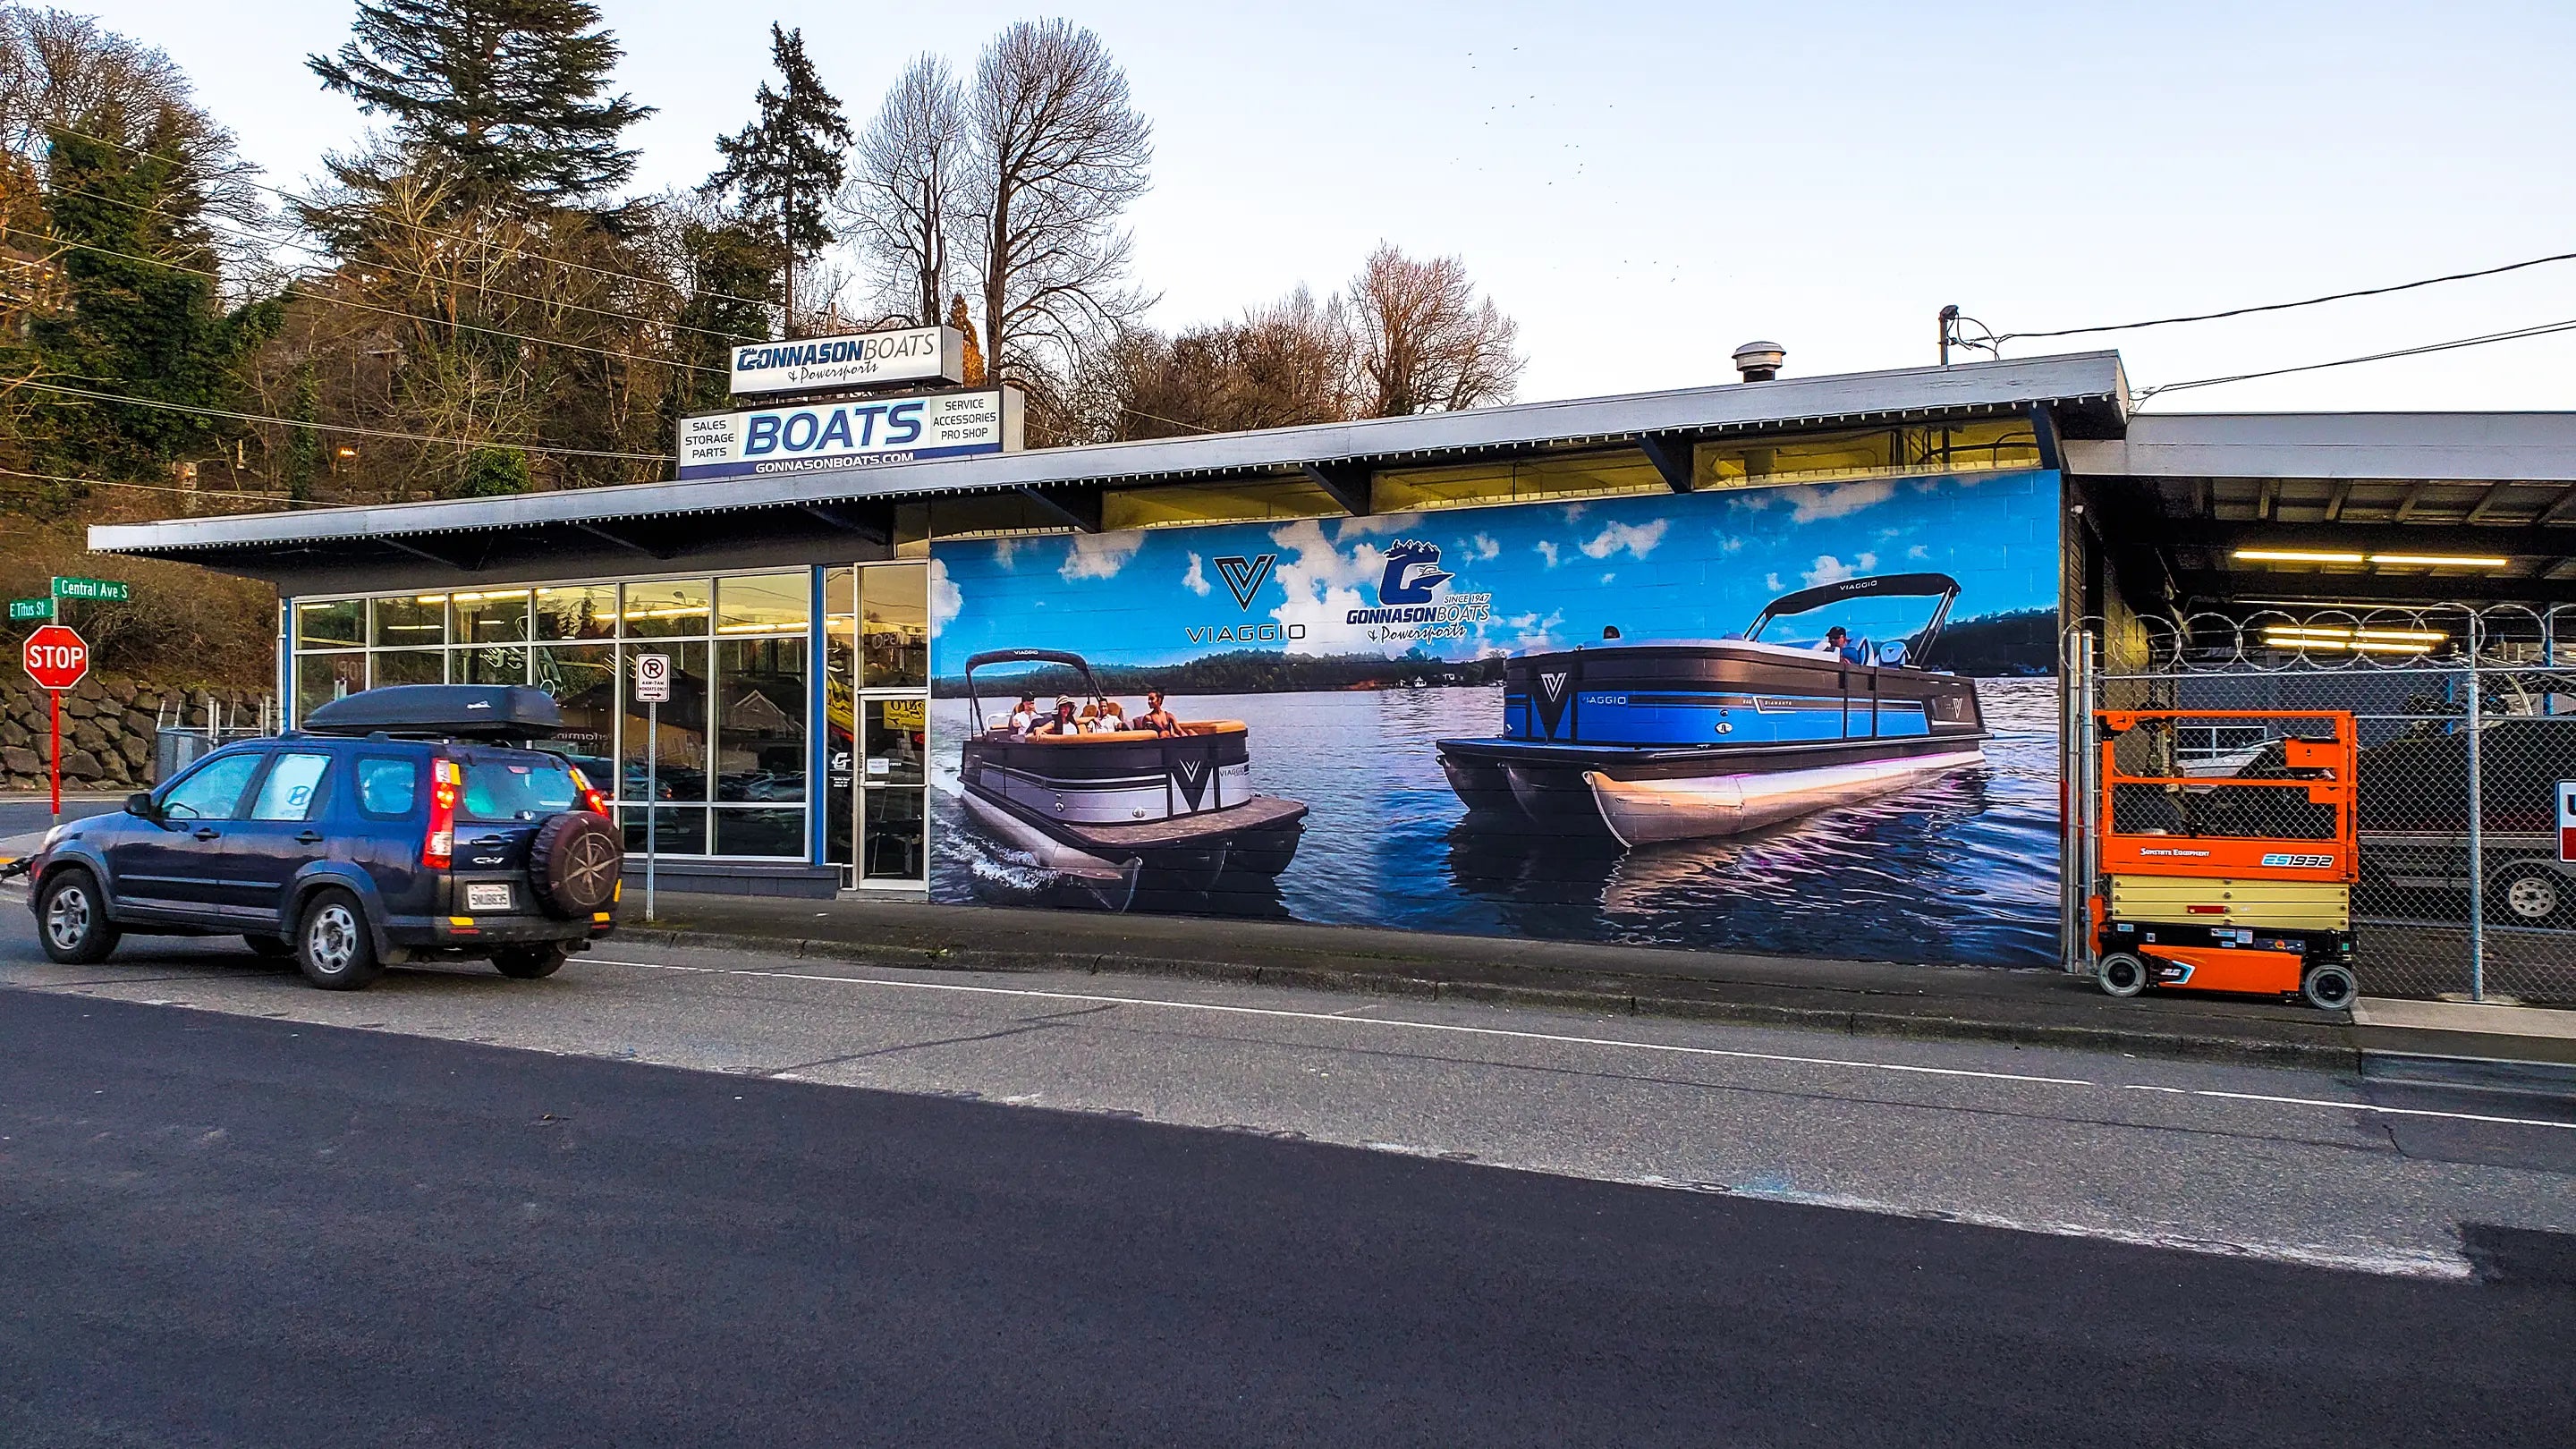 Printed outdoor wall mural we printed and wrapped on the side of Gonnason Boats, Boat Dealership in Seattle, WA